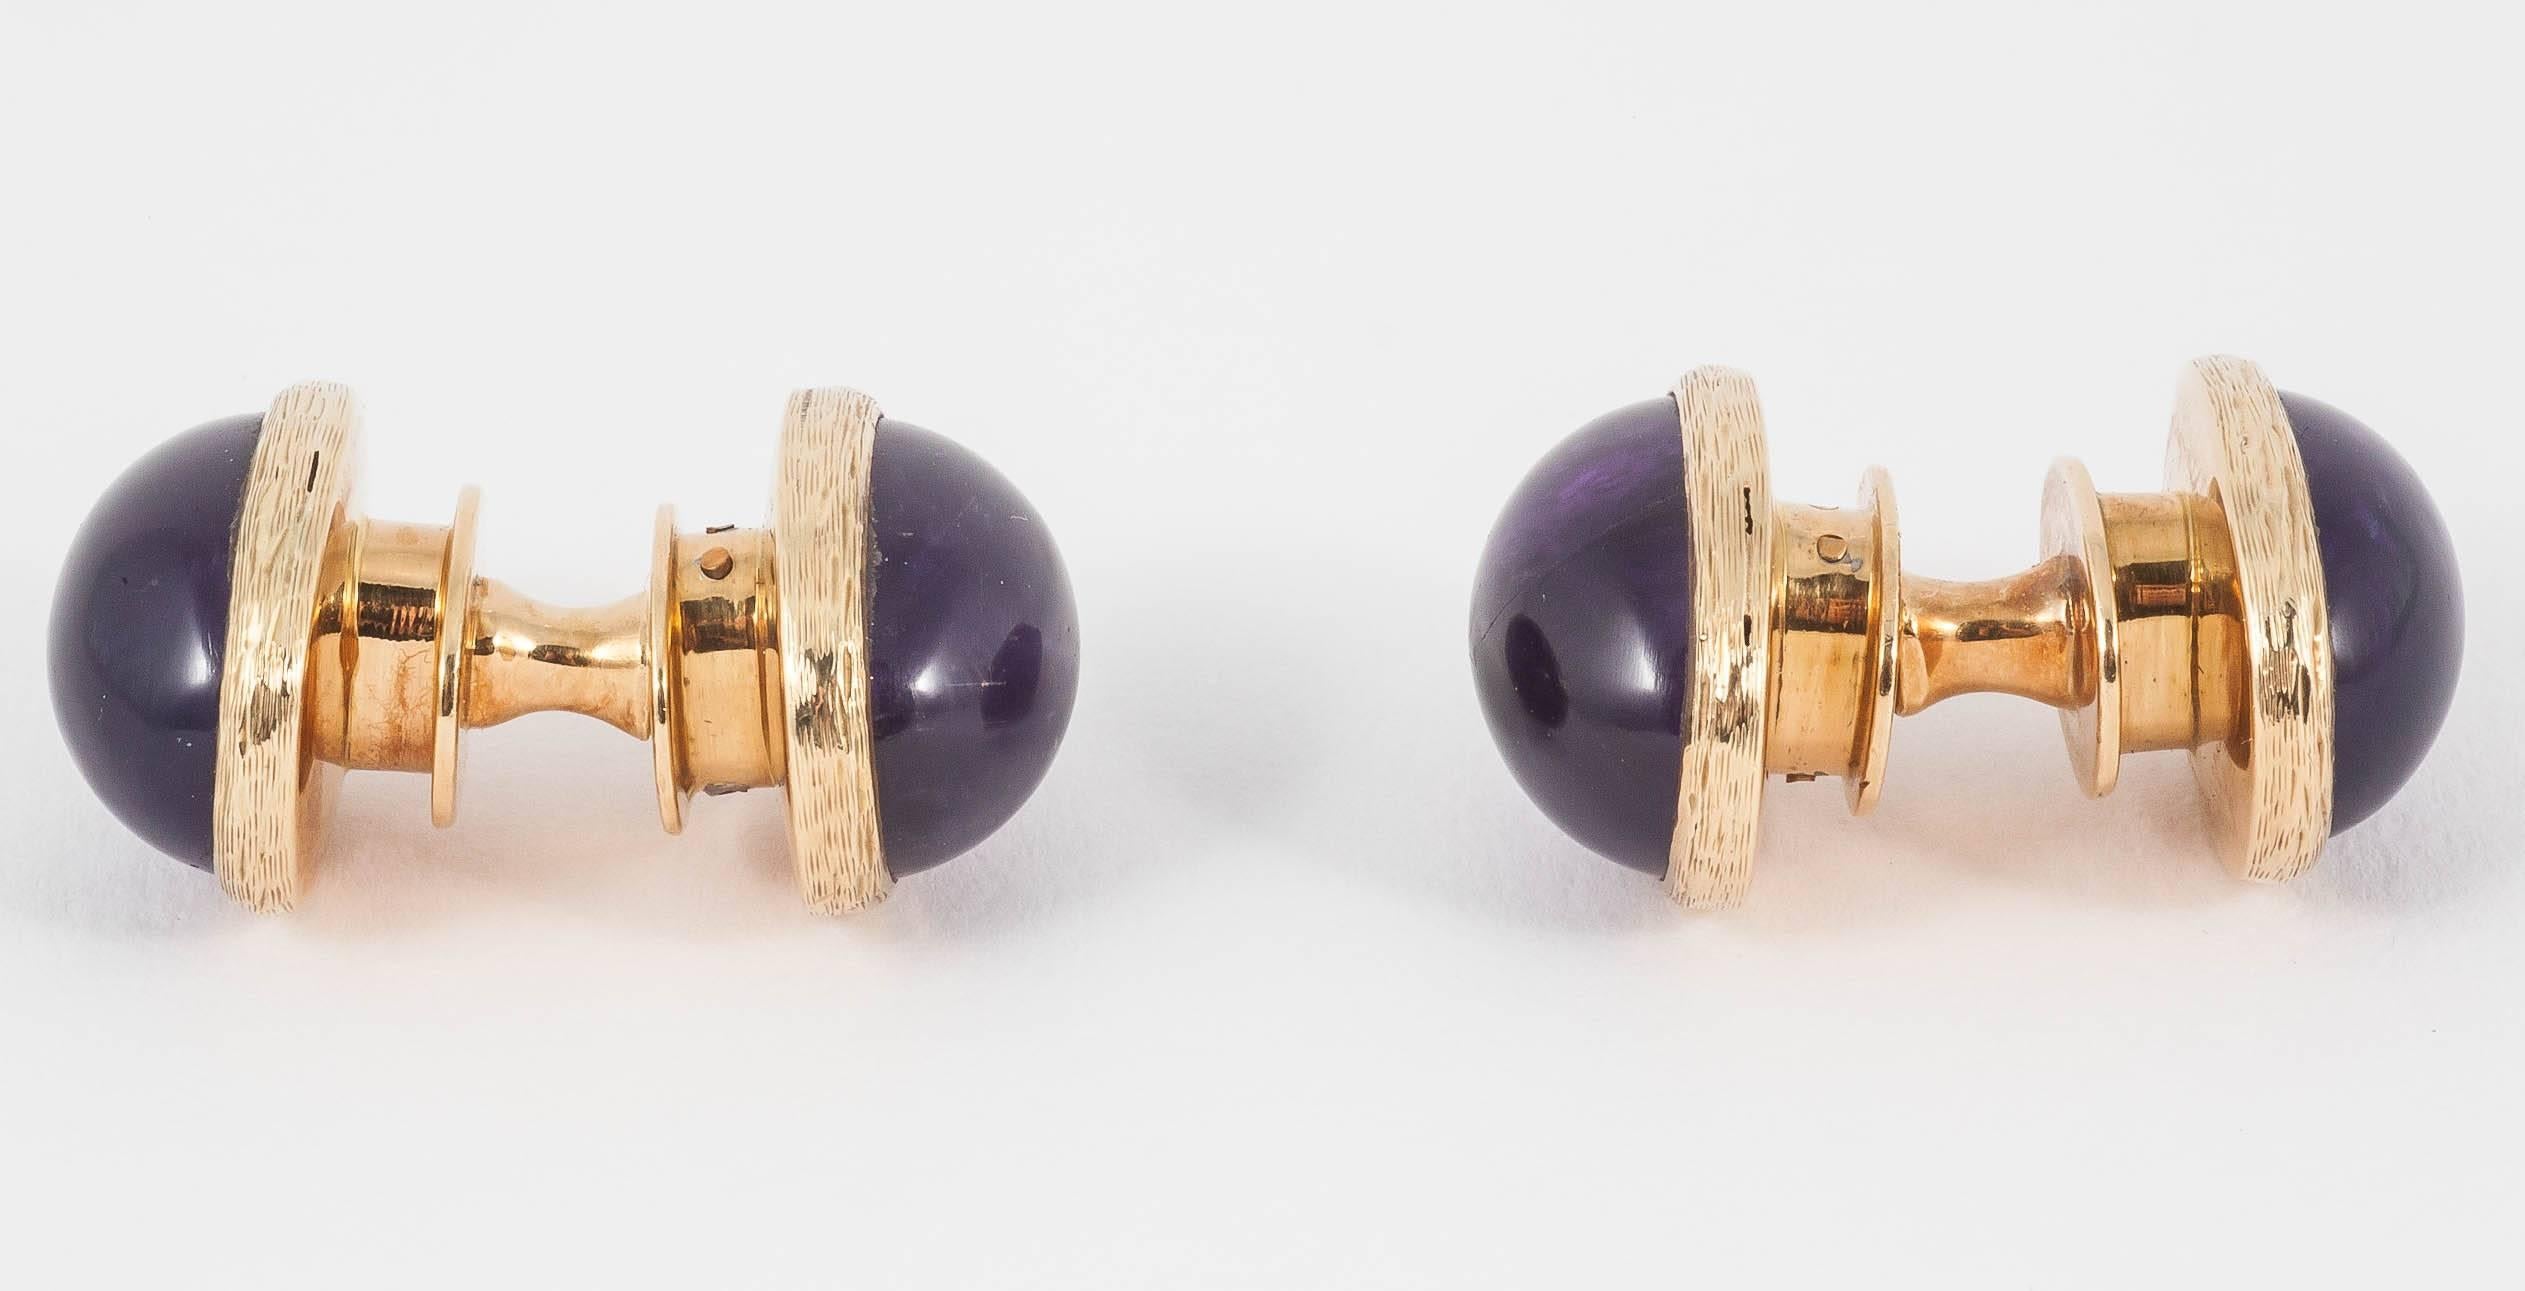 A heavy quality pair of large cabochon shaped amethyst double sided cufflinks mounted in 18 carat yellow gold. Snap-in design where the links join together very effectively in a suction fit. Made by S J Phillips 1982 (London).
Measures 20mm in